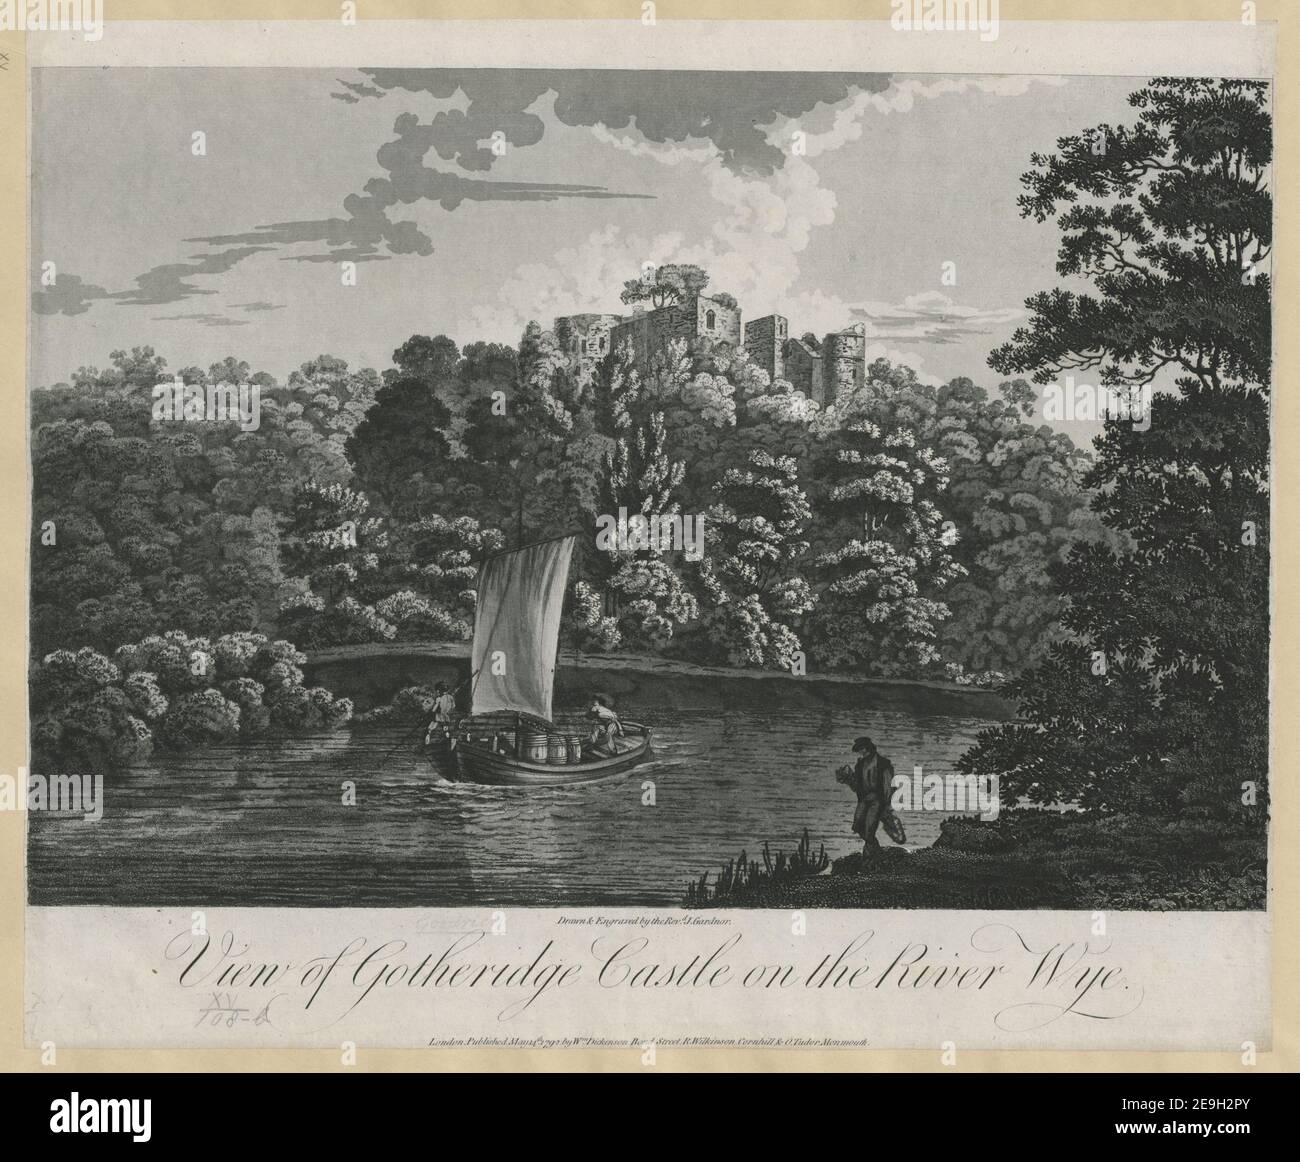 View of Gotheridge Castle on the River Wye.  Author  Gardnor, John 15.108.b. Place of publication: London. Publisher: Published May 14th. 1792 by Wm. Dickenson Bond Street, R. Wilkinson, Cornhill, , O. Tudor Monmouth. Date of publication: [May 14 1792]  Item type: 1 print Medium: aquatint and etching Dimensions: sheet 37.4 x 45.3 cm (trimmed below platemark)  Former owner: George III, King of Great Britain, 1738-1820 Stock Photo